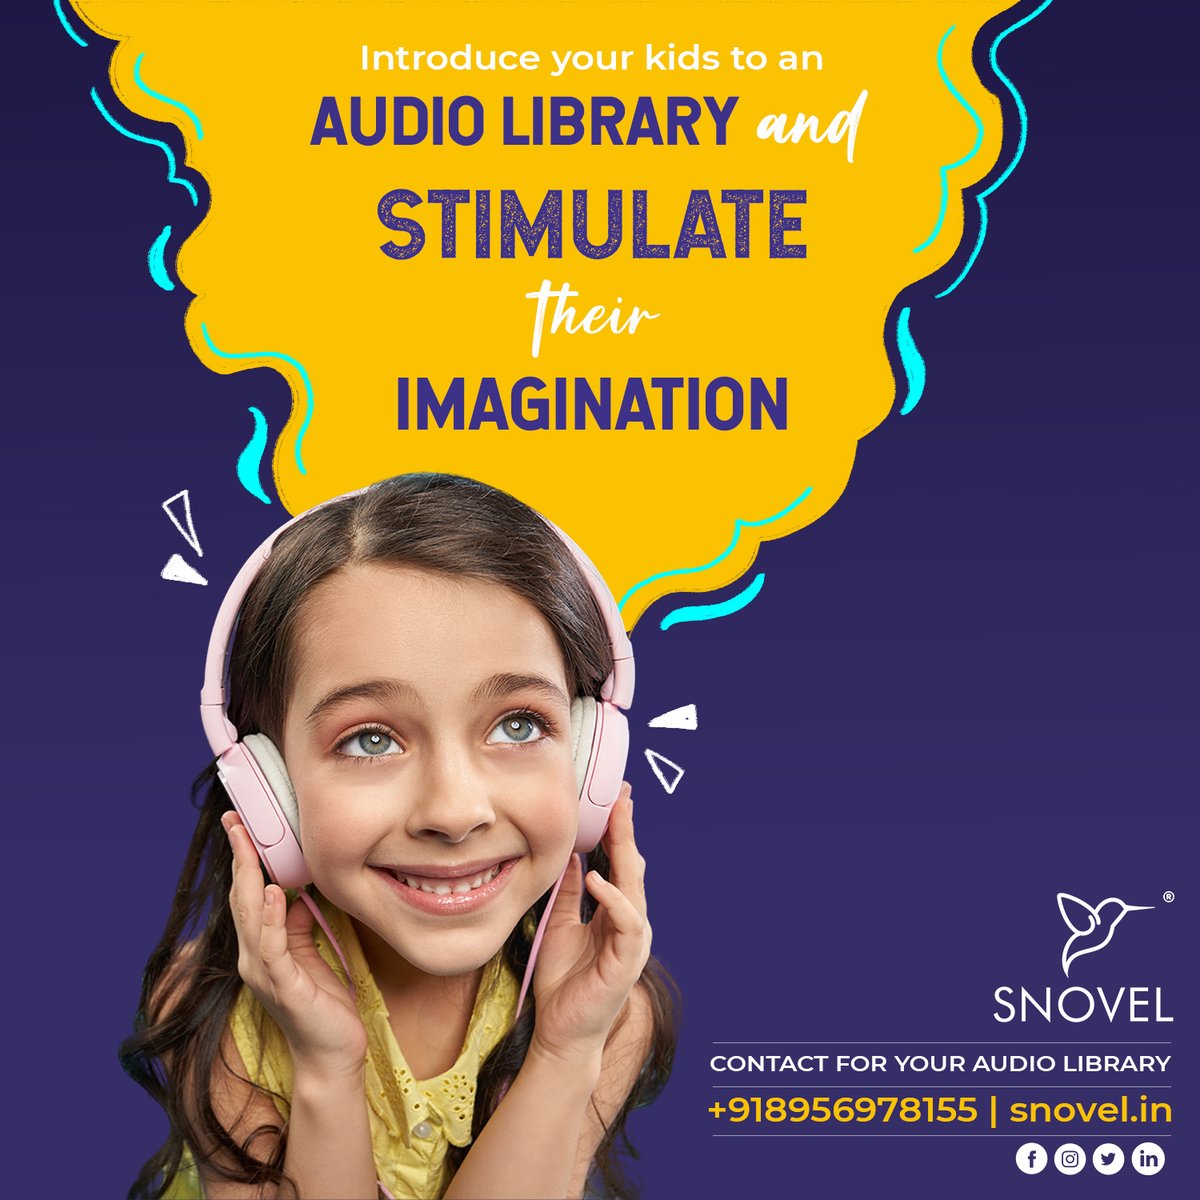 Imagination helps boost kids' social, emotional and cognitive development.

Register for Audio Library now and let your kid enjoy incredible stories.
.
.
.
.
.
 #snovel #audiocourse #storytelling #imaginationpower  #podcasts #digitallearning #funlearningactivity #funlearning